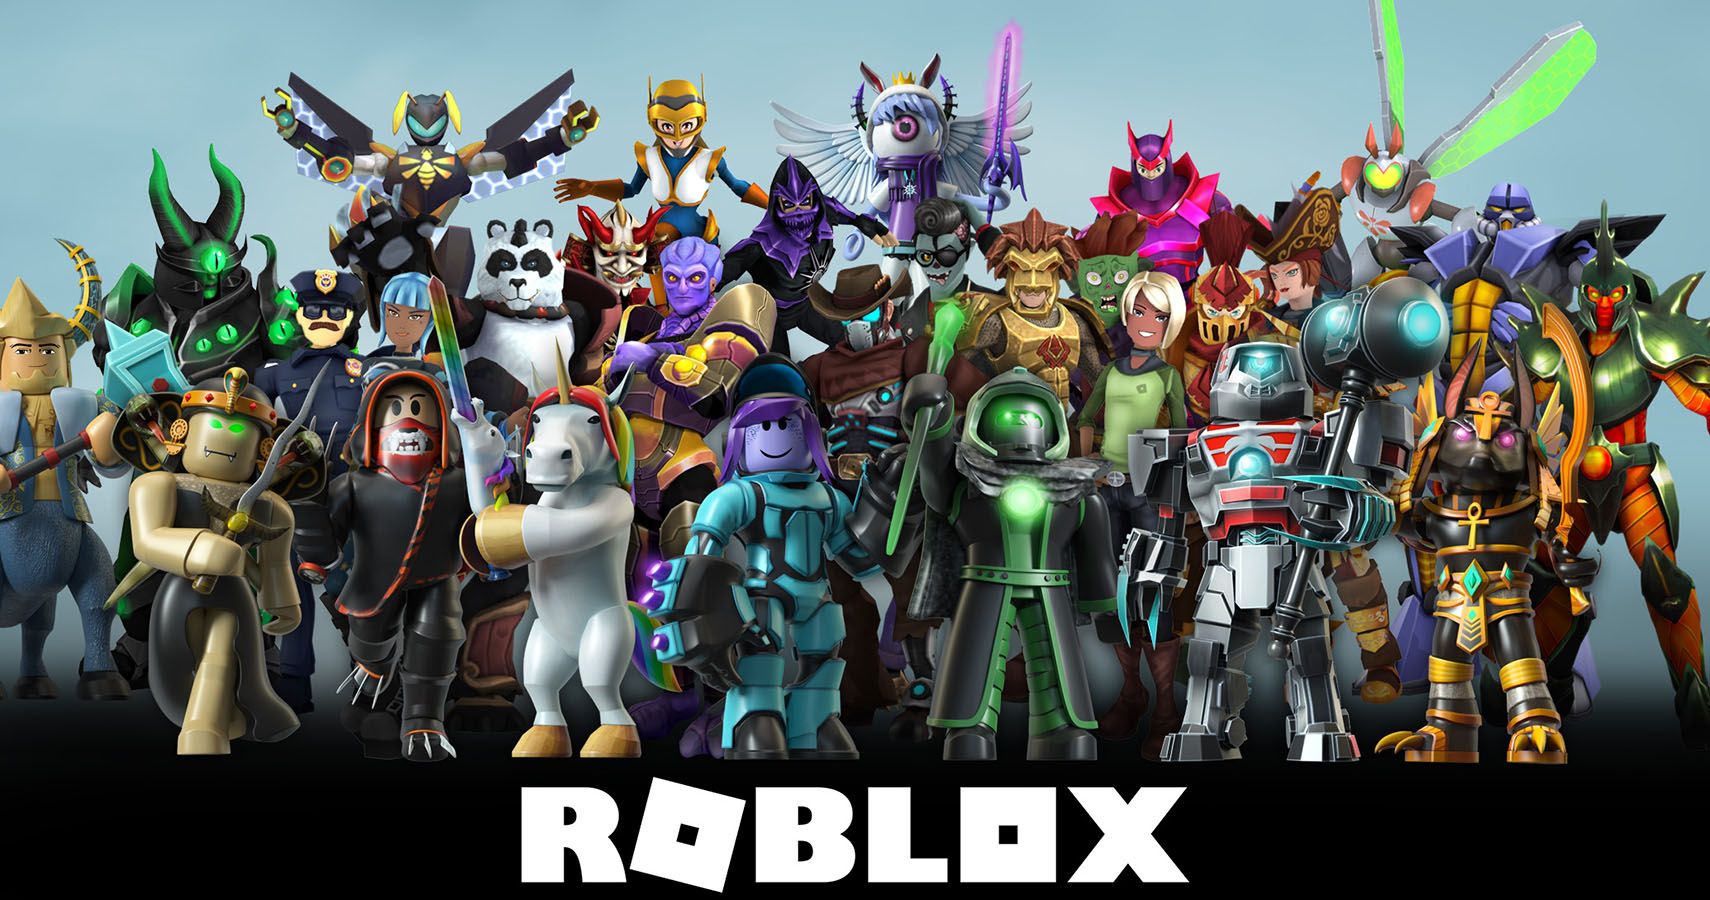 Realistic 3D Avatars May Be Coming to Roblox